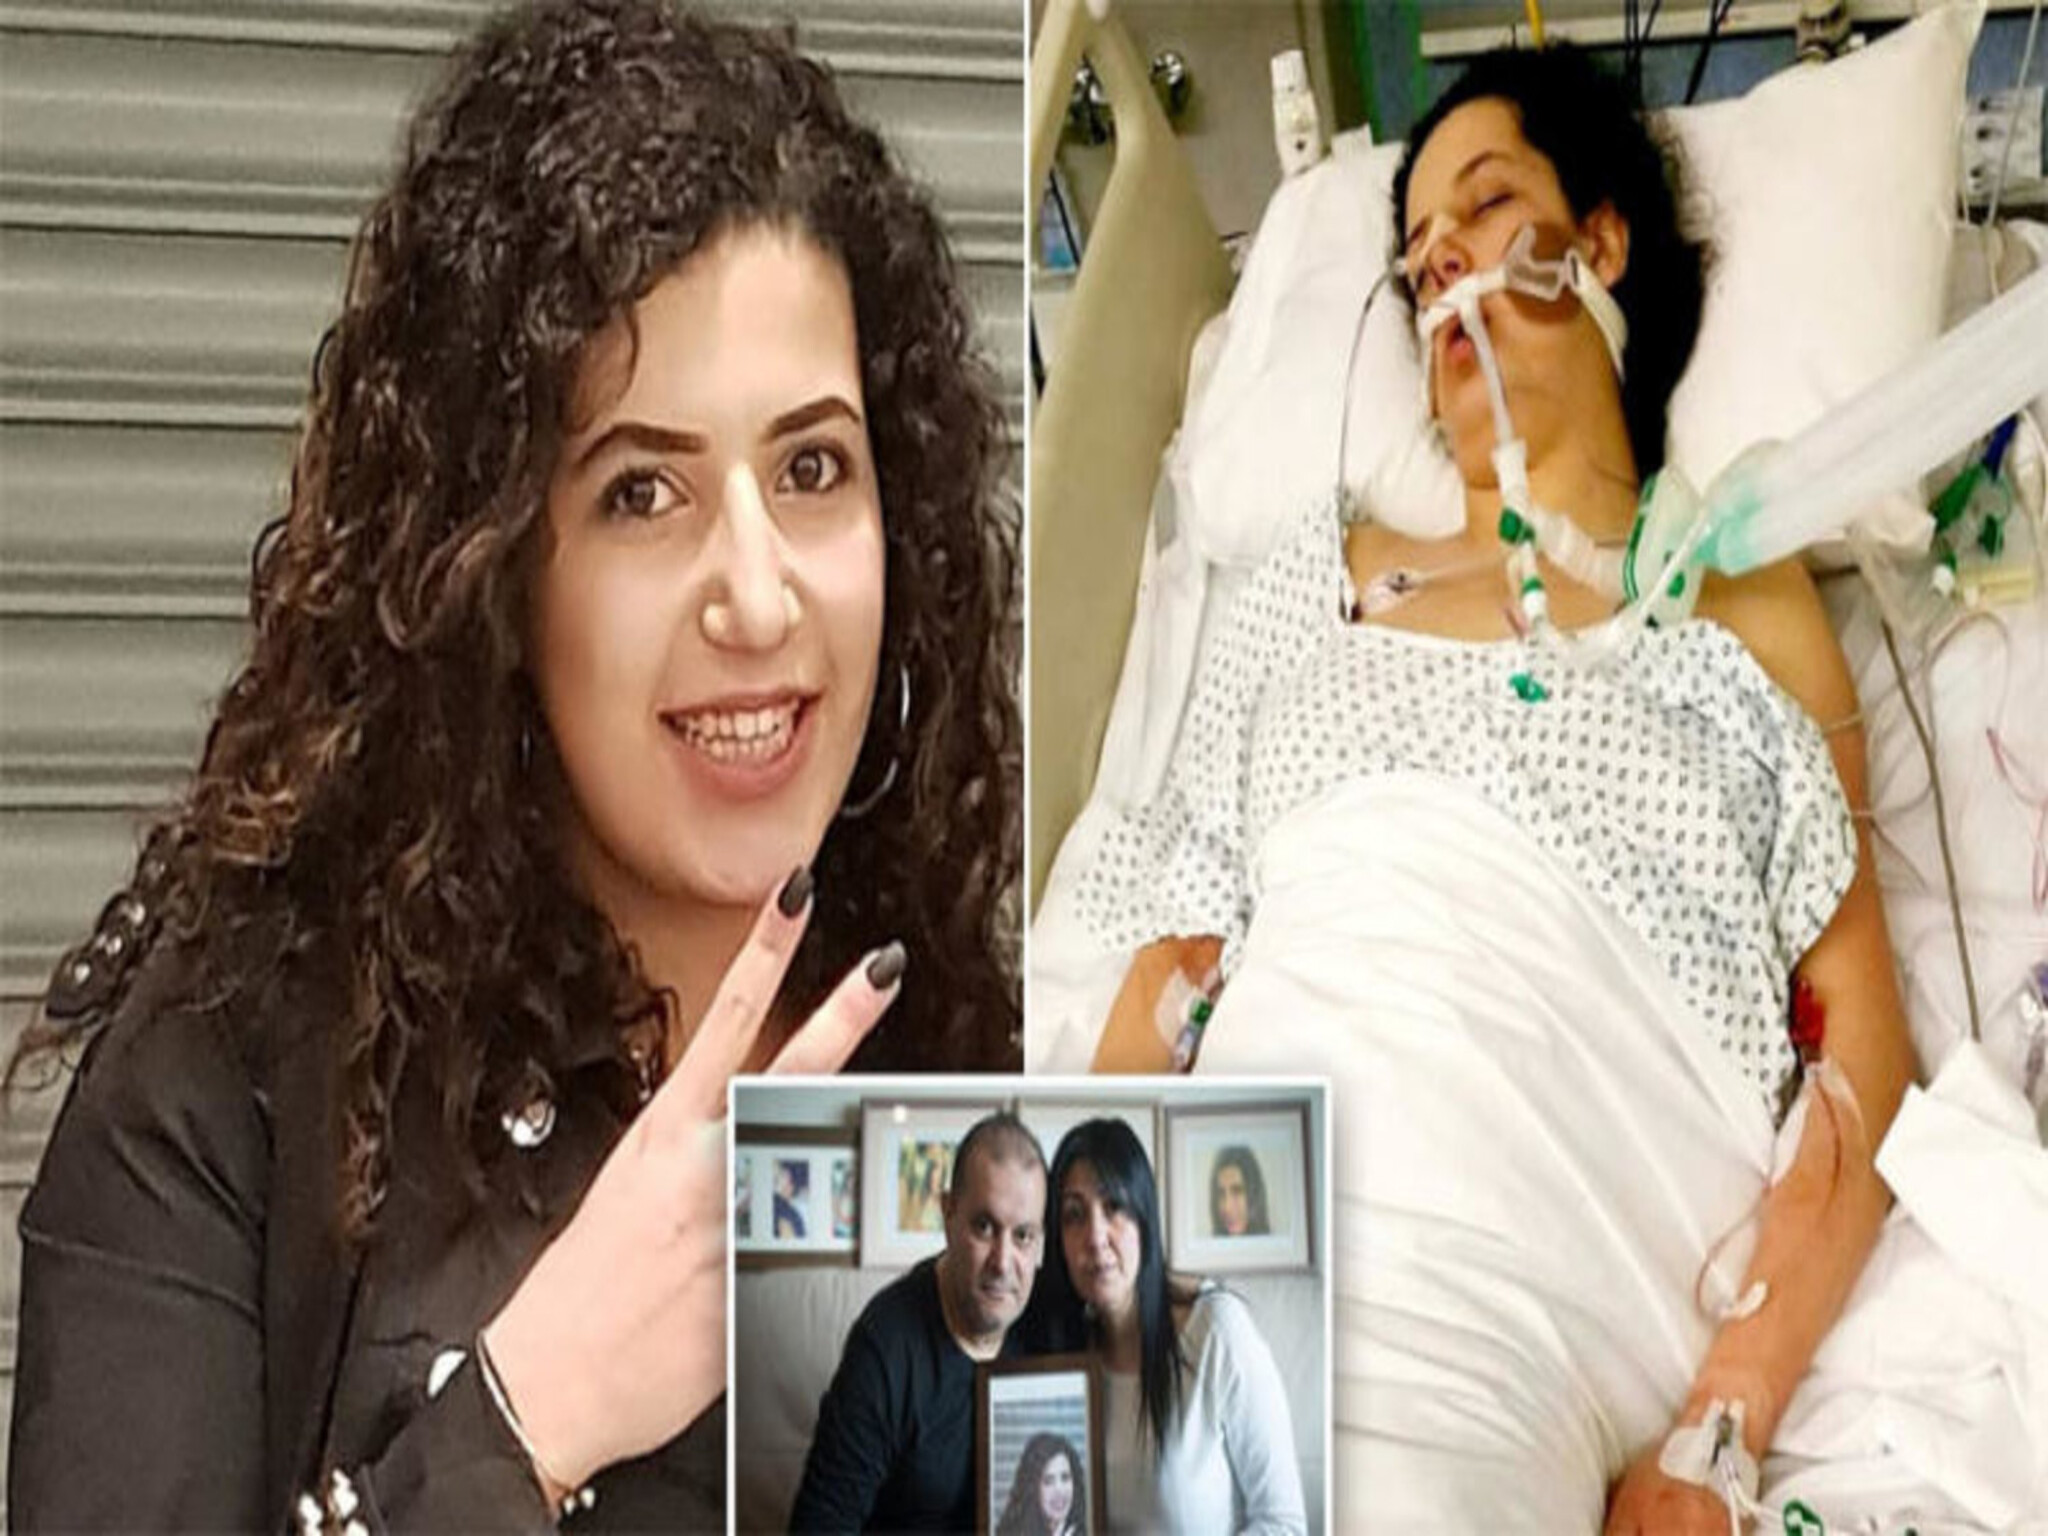 The cause of death of the Egyptian student Maryam was natural